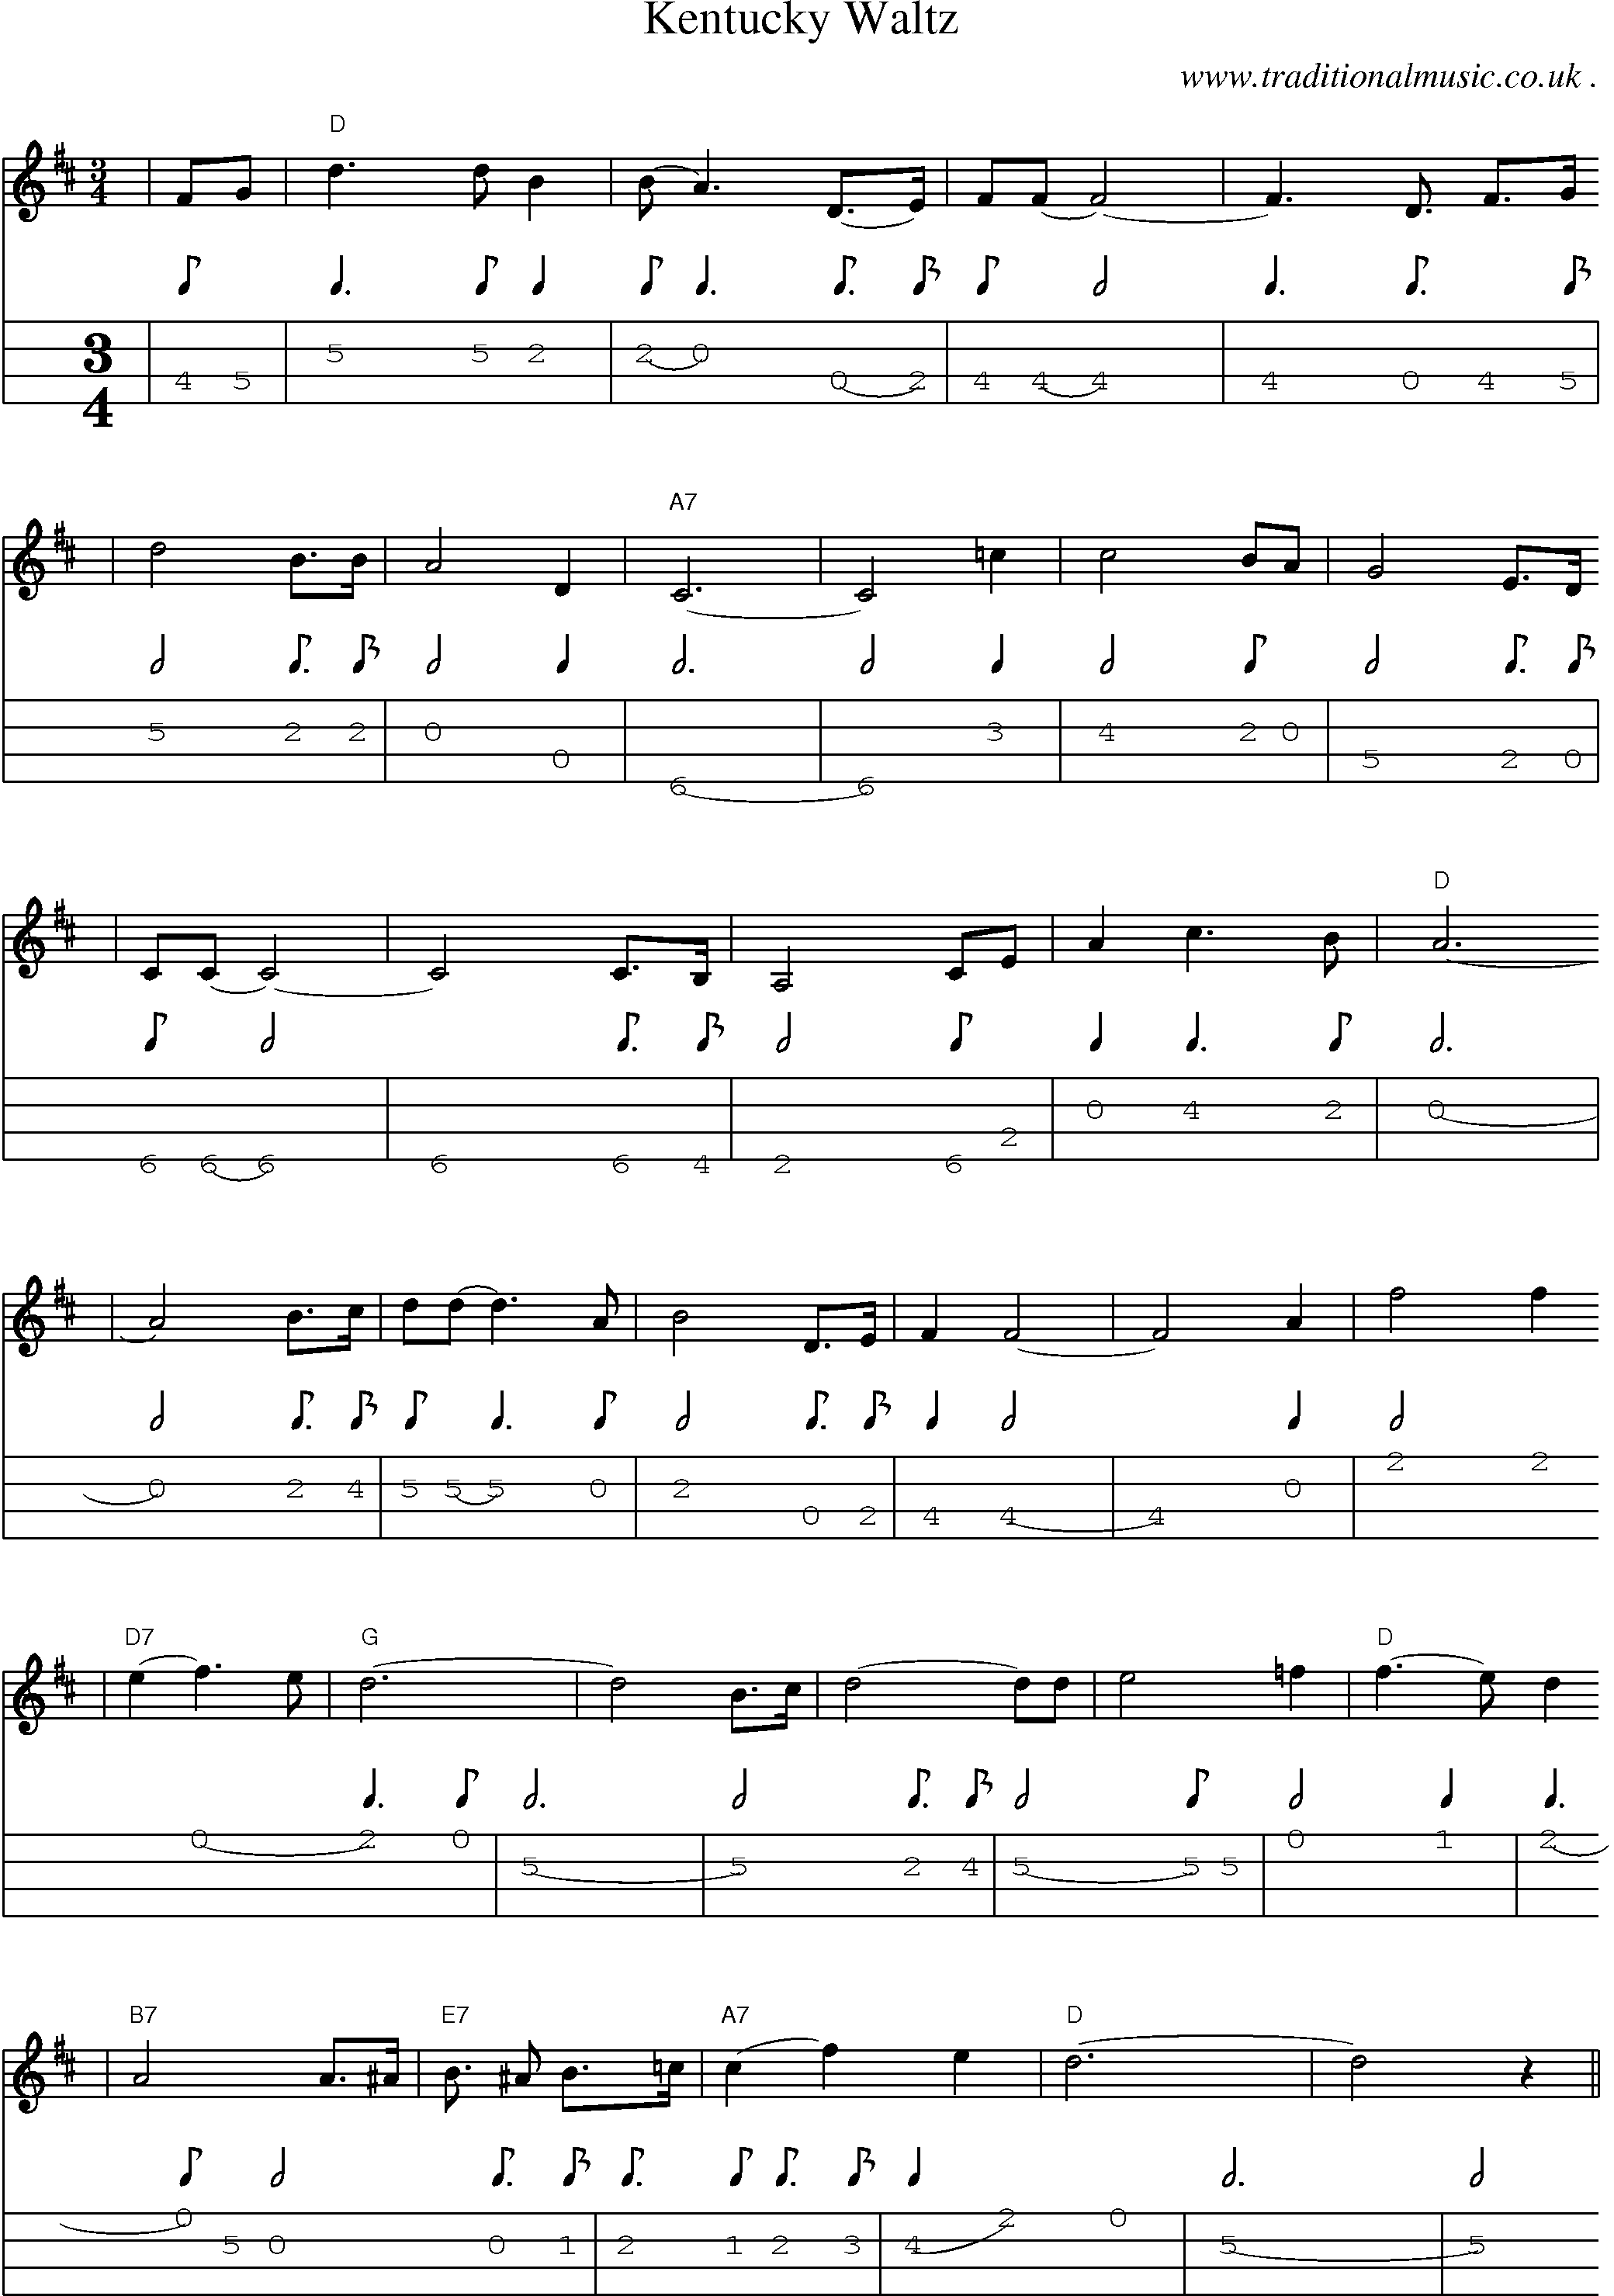 American Old-time music, Scores and Tabs for Mandolin - Kentucky Waltz